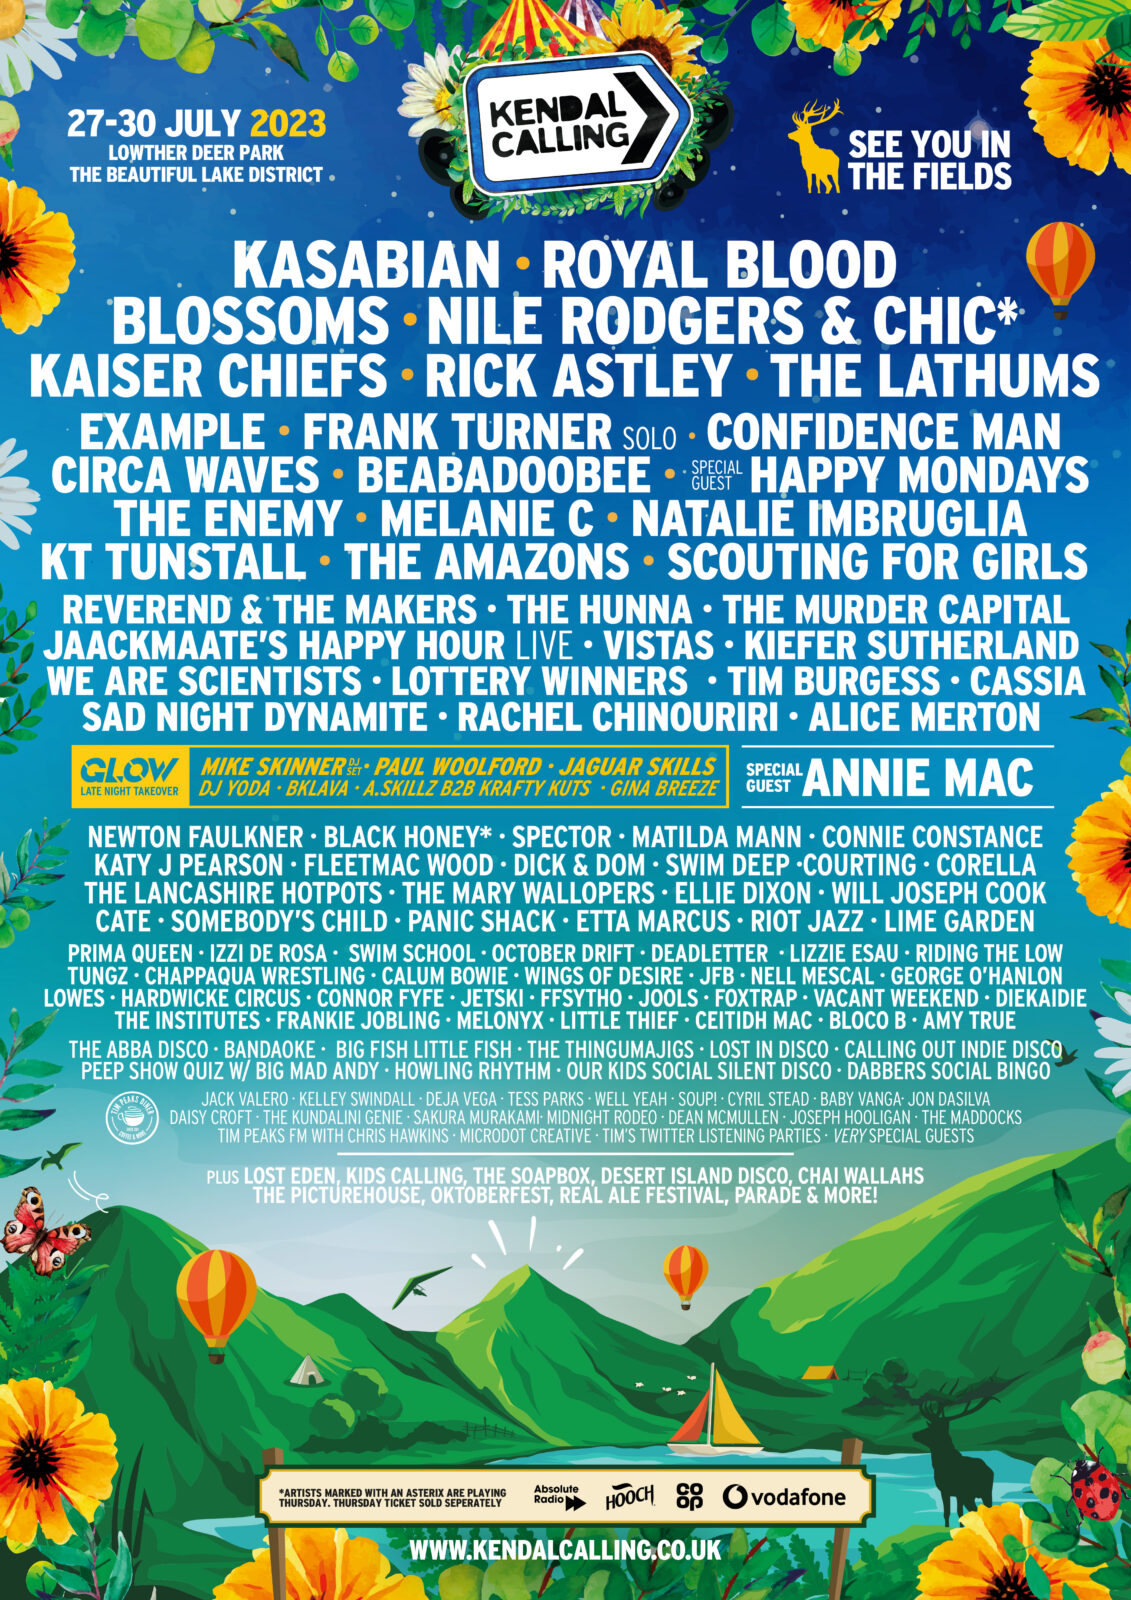 Kendal Calling 2023 festival lineup released with headliners including